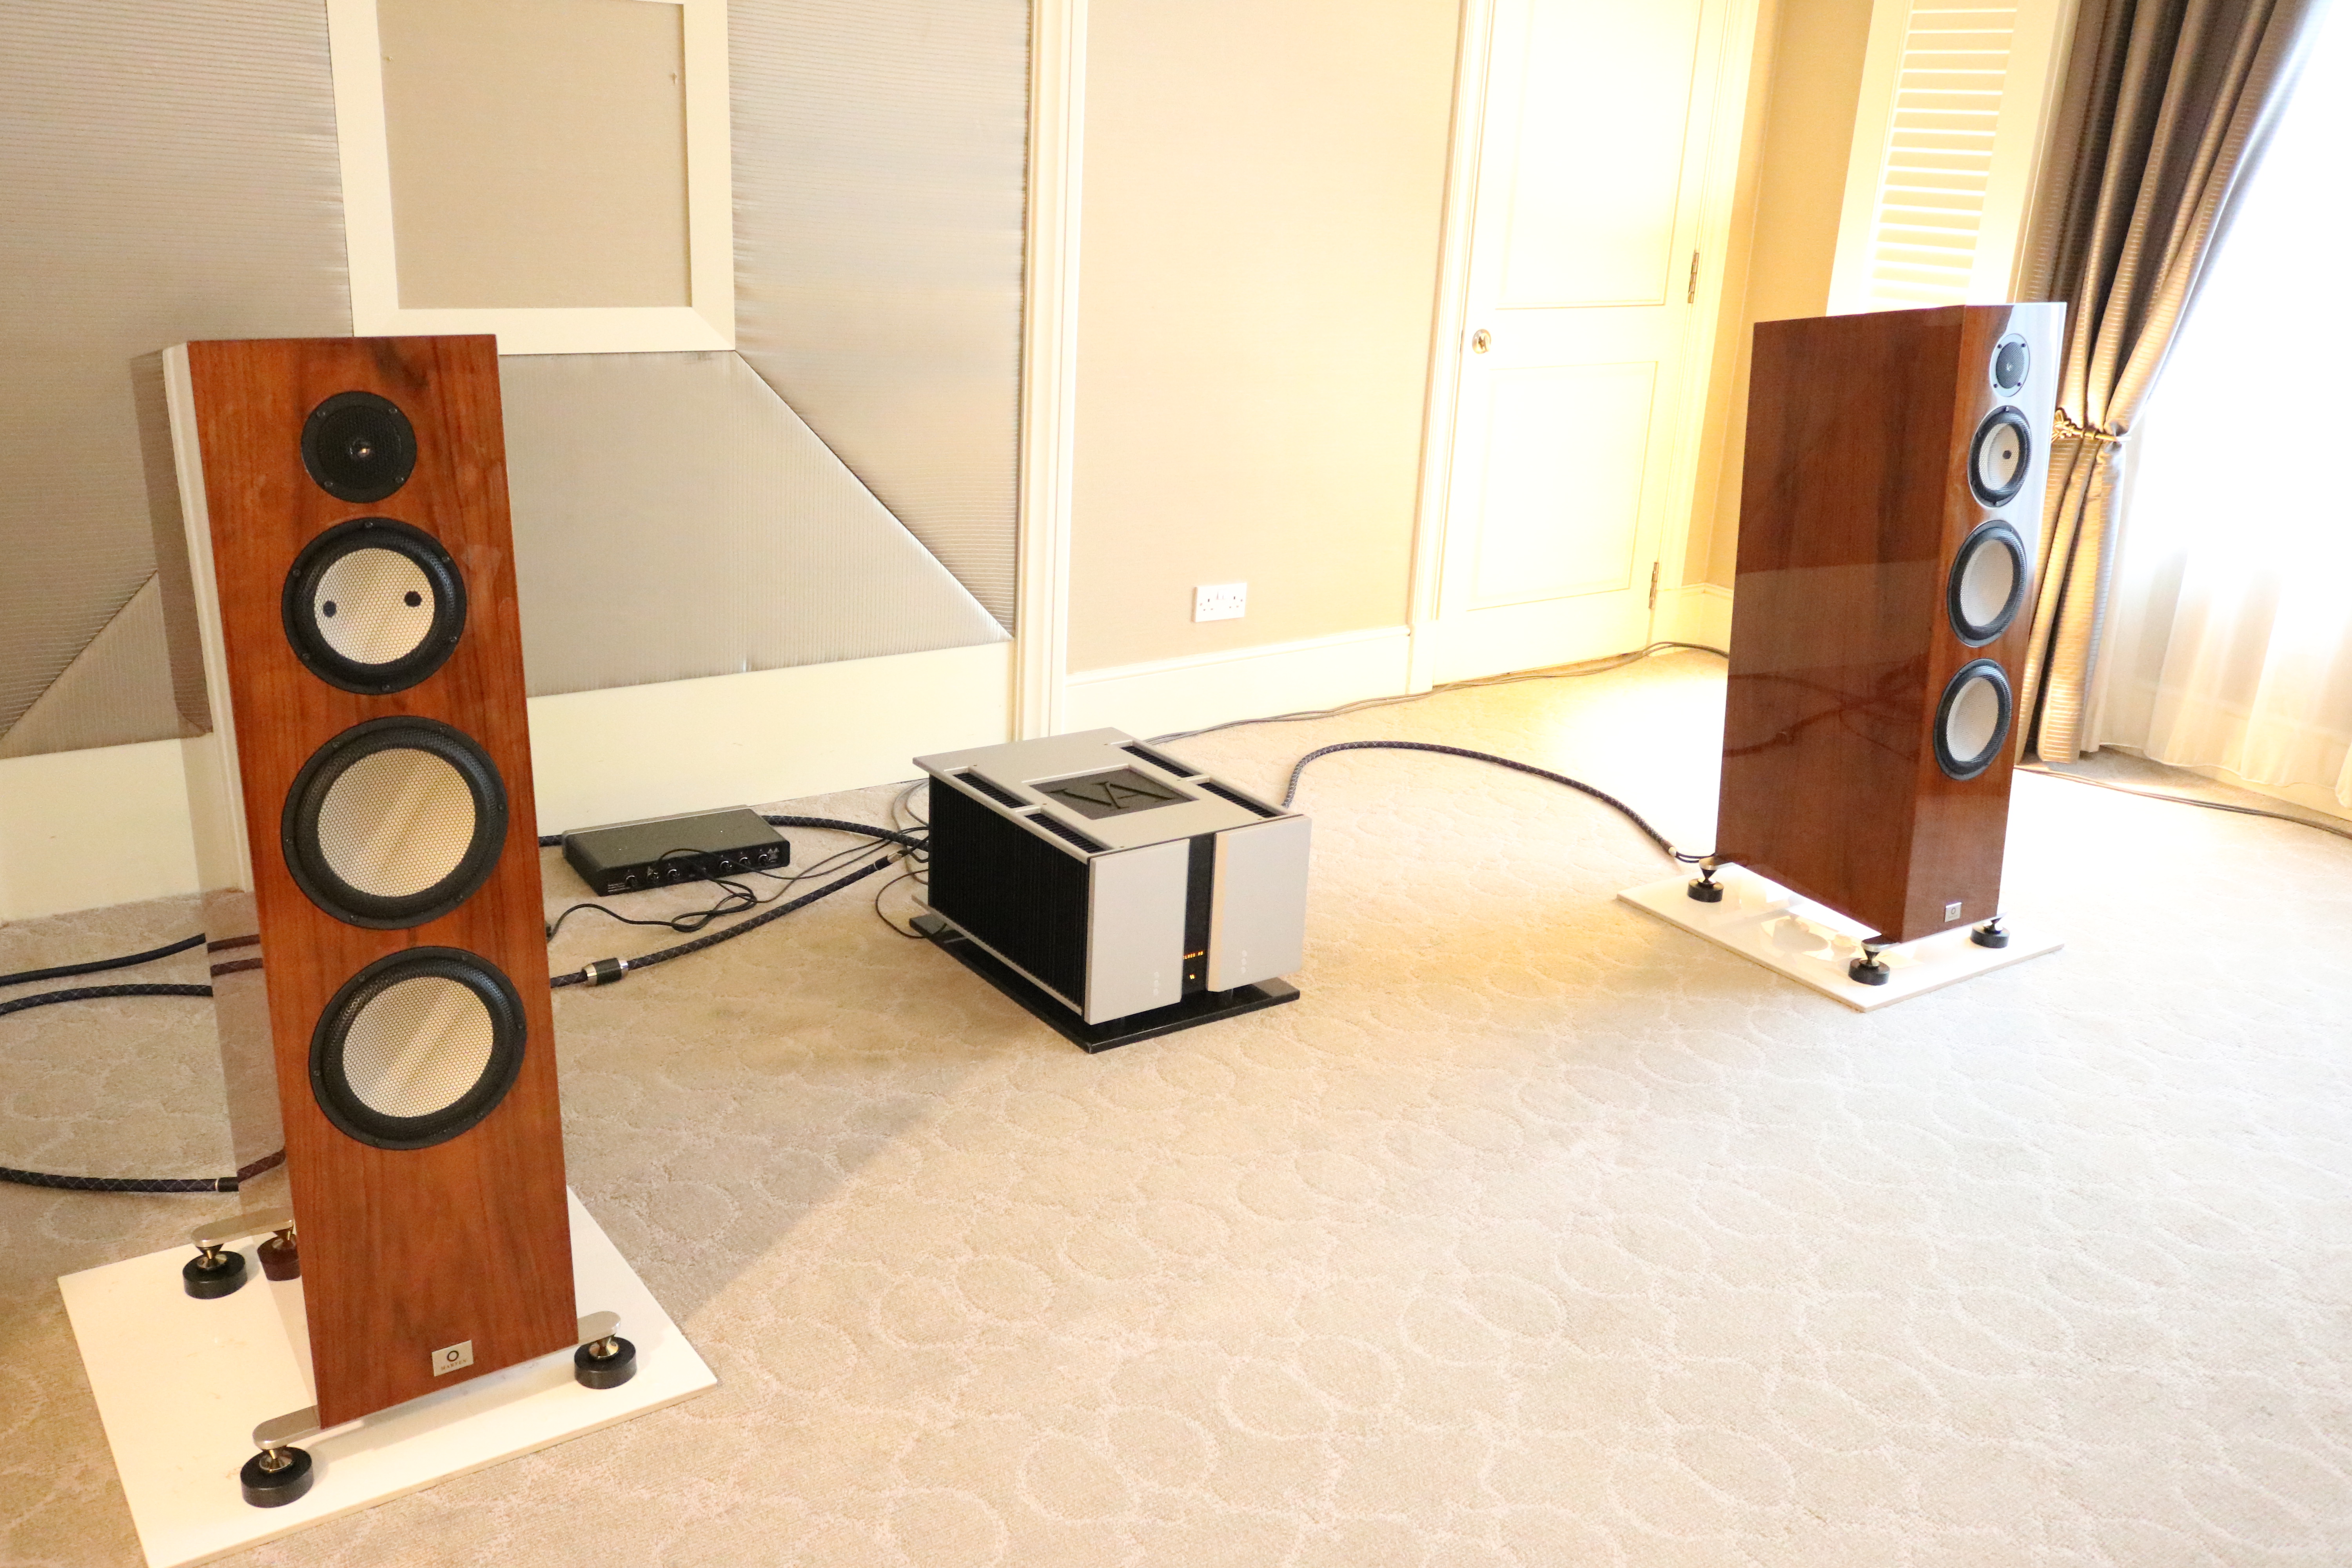 Marten Bird 2 speakers, Vitus pre and power amps, CD transport and DAC and Dohmann turntable in the Swedisn statement room.